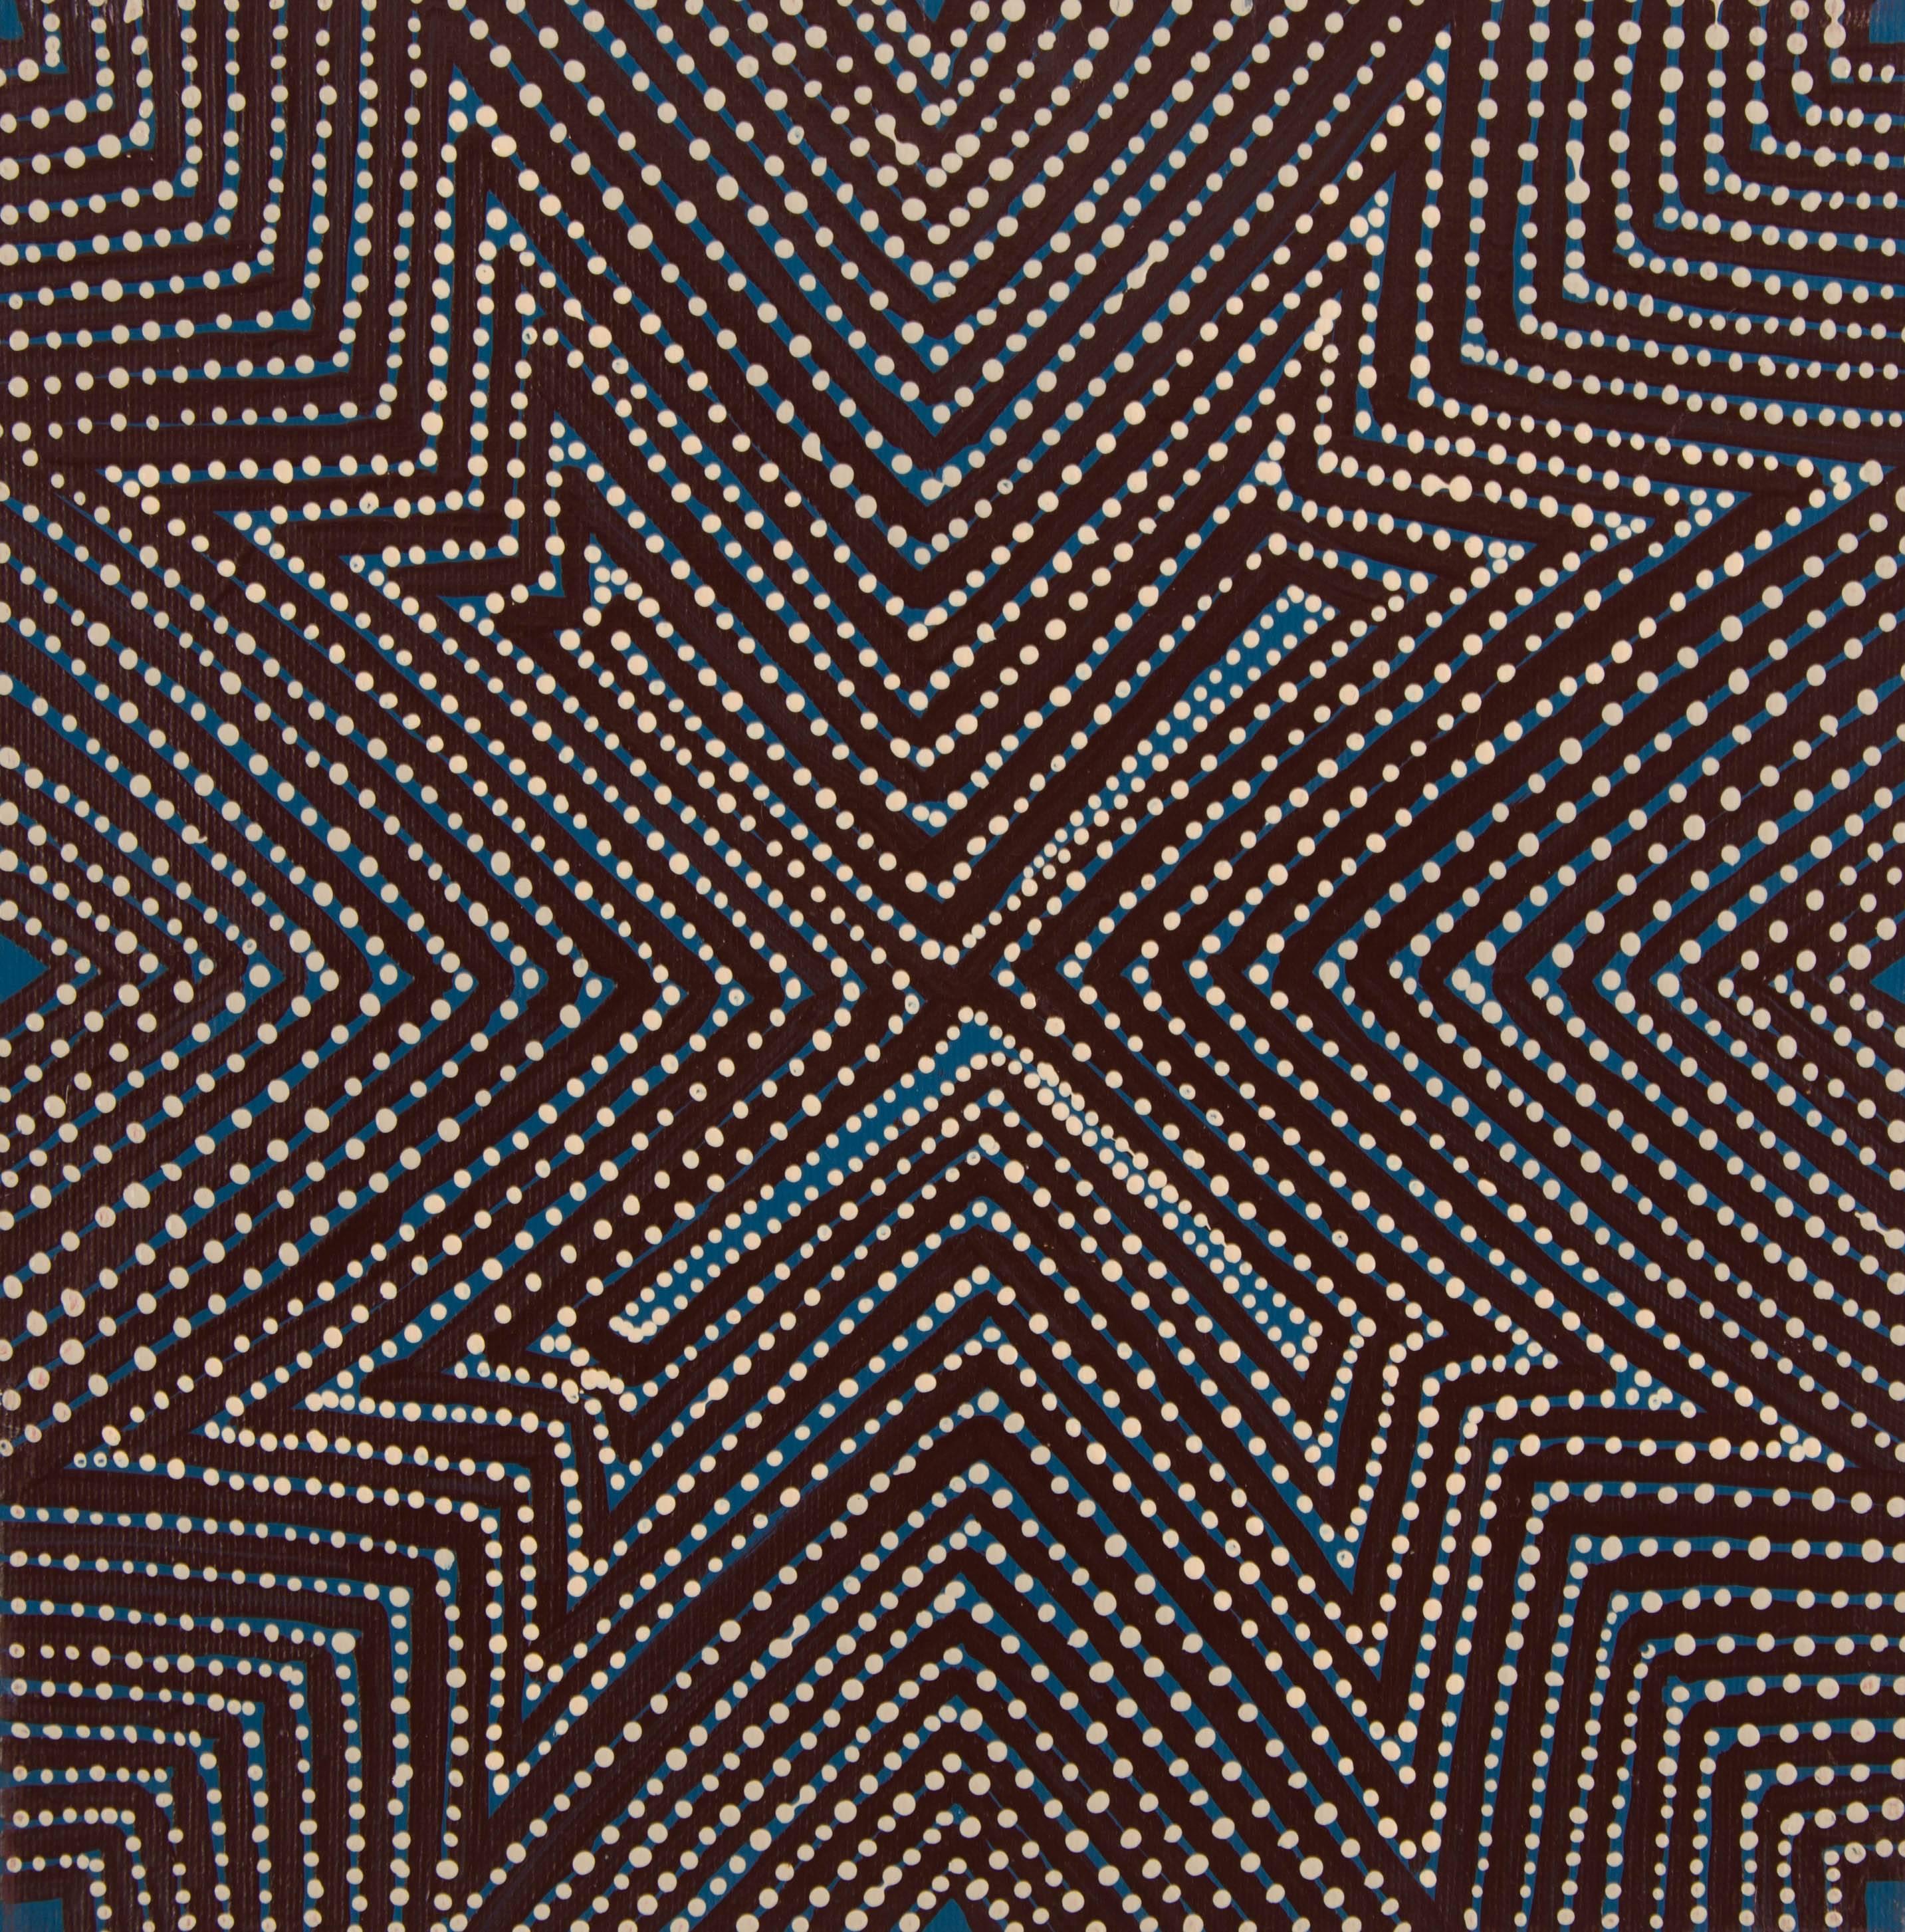 This small painting is a fine example of contemporary Australian Aboriginal Painting, an art movement that, over the past few decades, has revolutionised Australian art by combining ancient tradition with modern materials.

The painting depicts